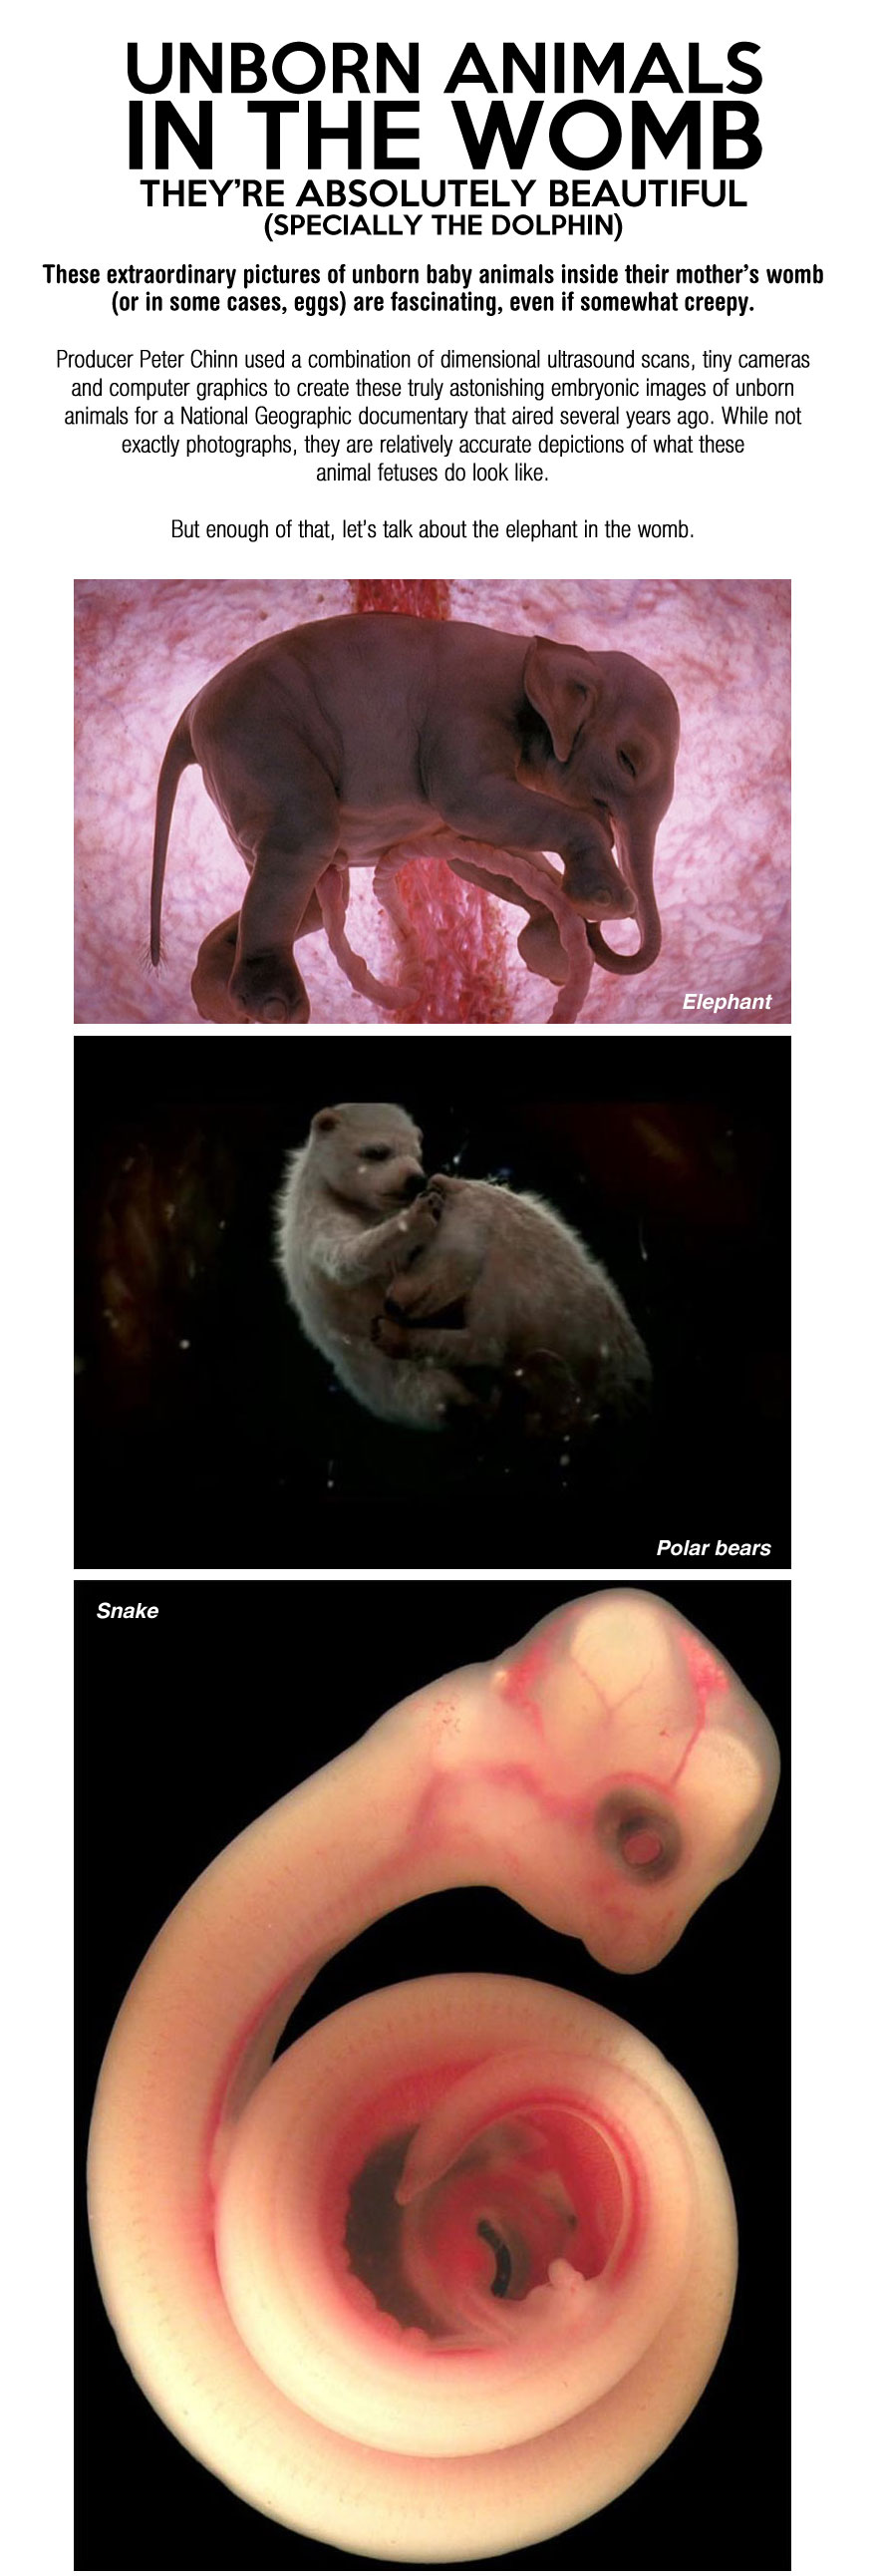 cool-animals-wound-reproduction-elephant Have You Seen Unborn Animals in the Womb, Absolutely Beautiful! A Must Look